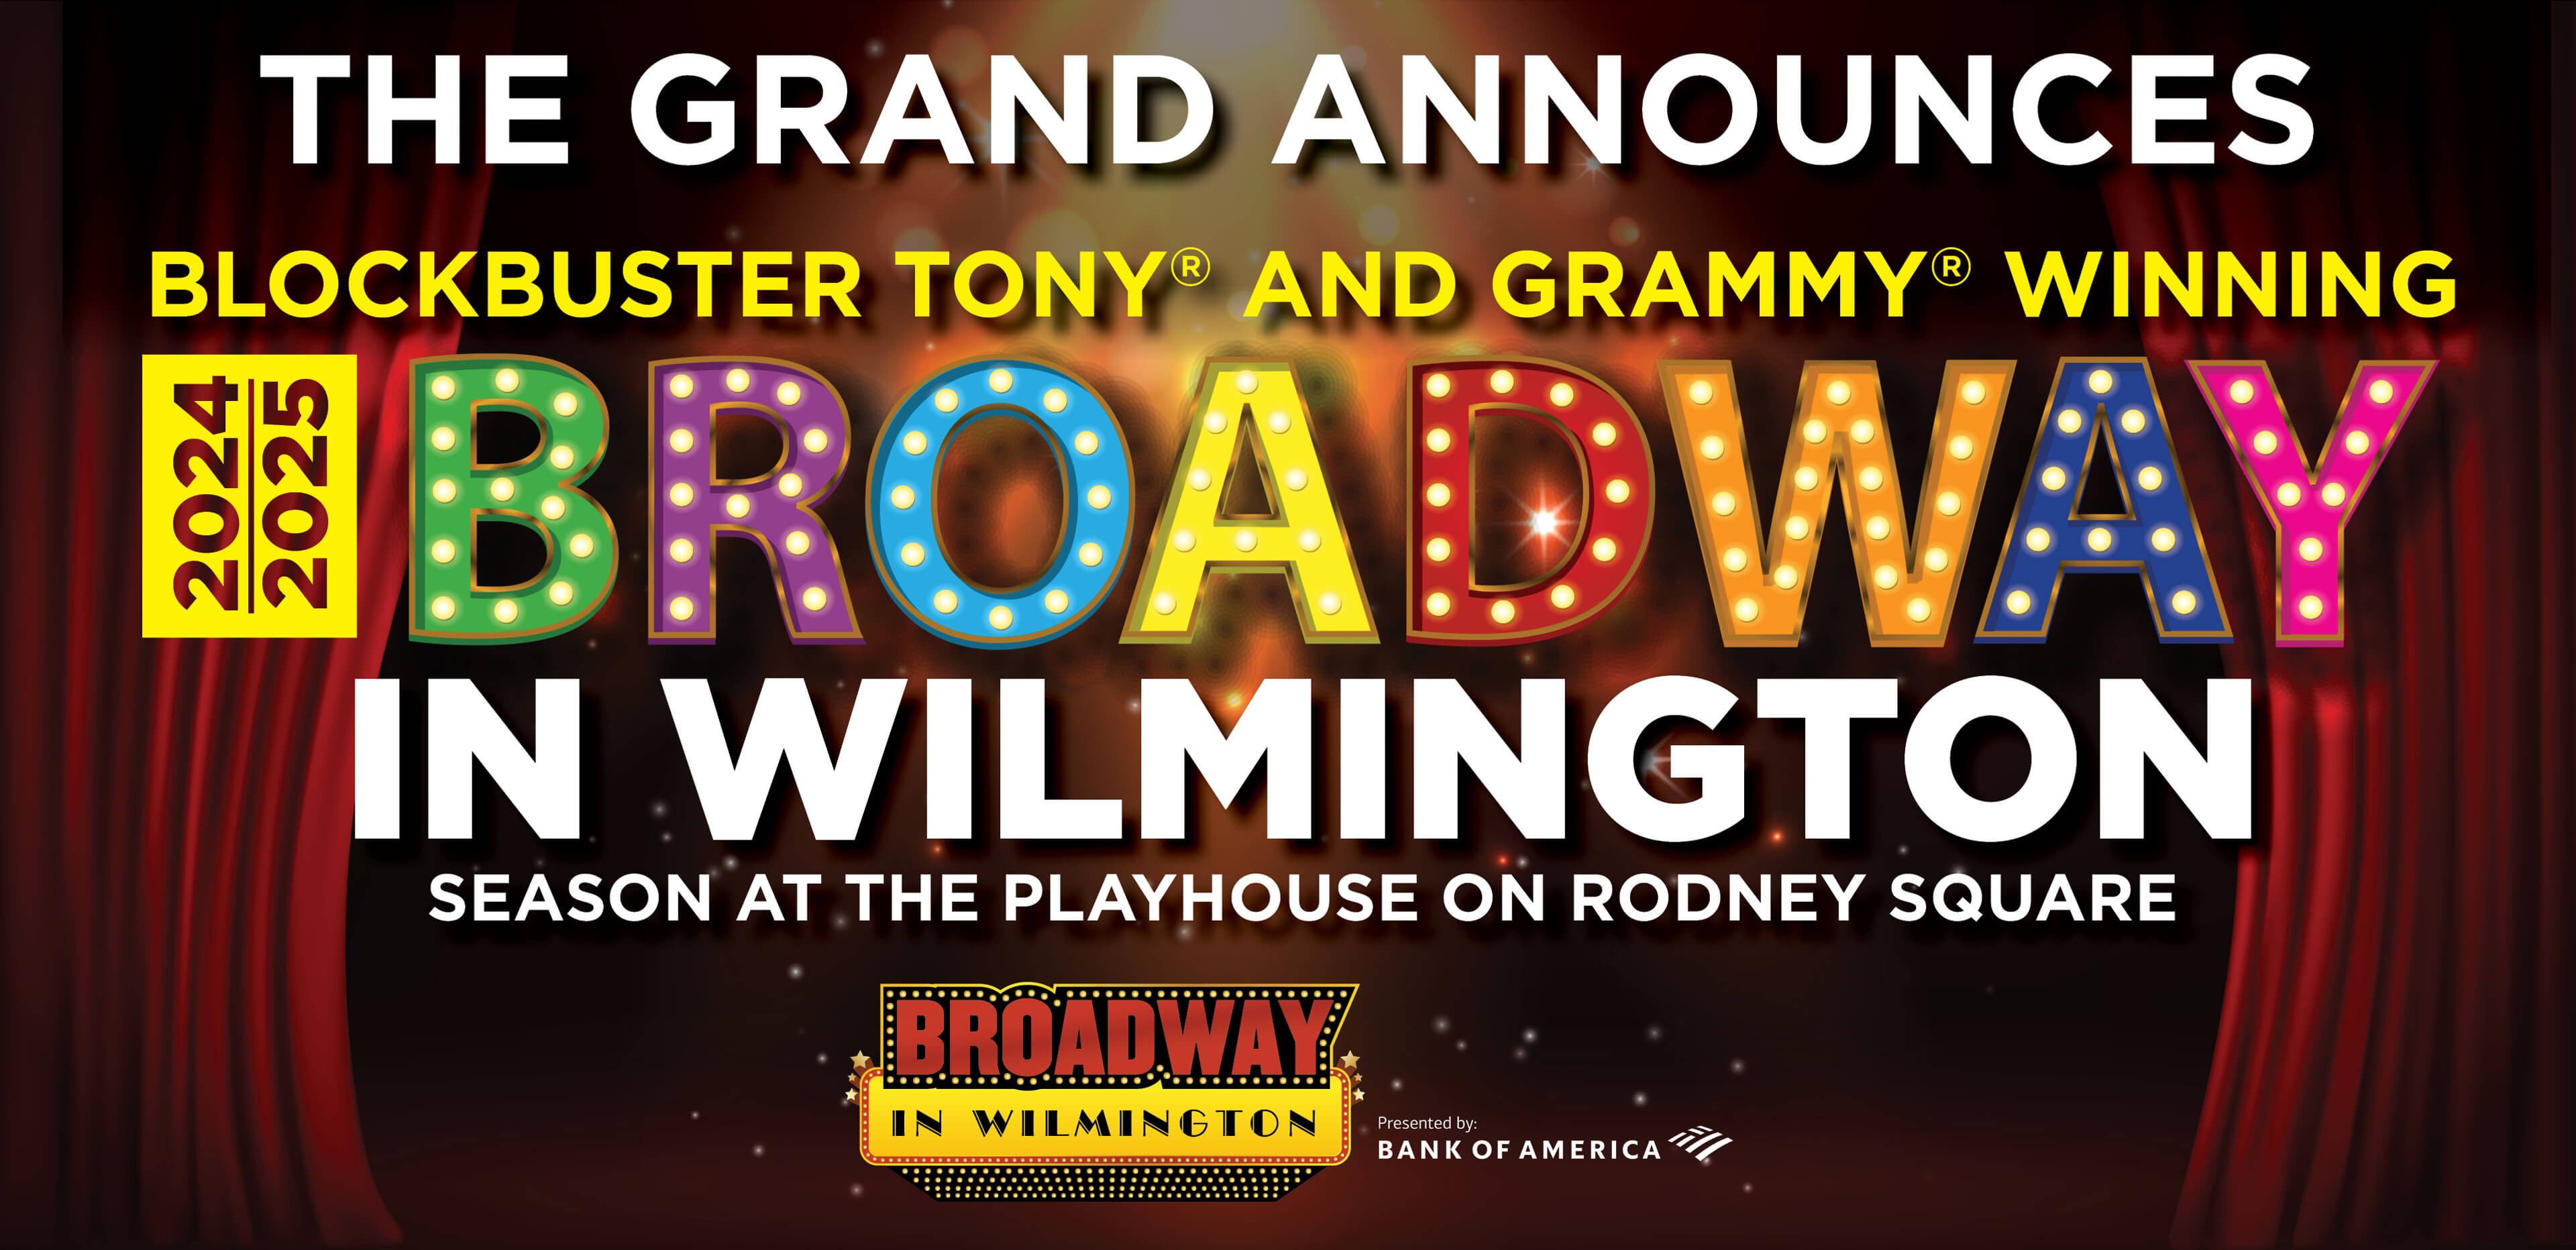 Broadway in Wilmington: Learn More